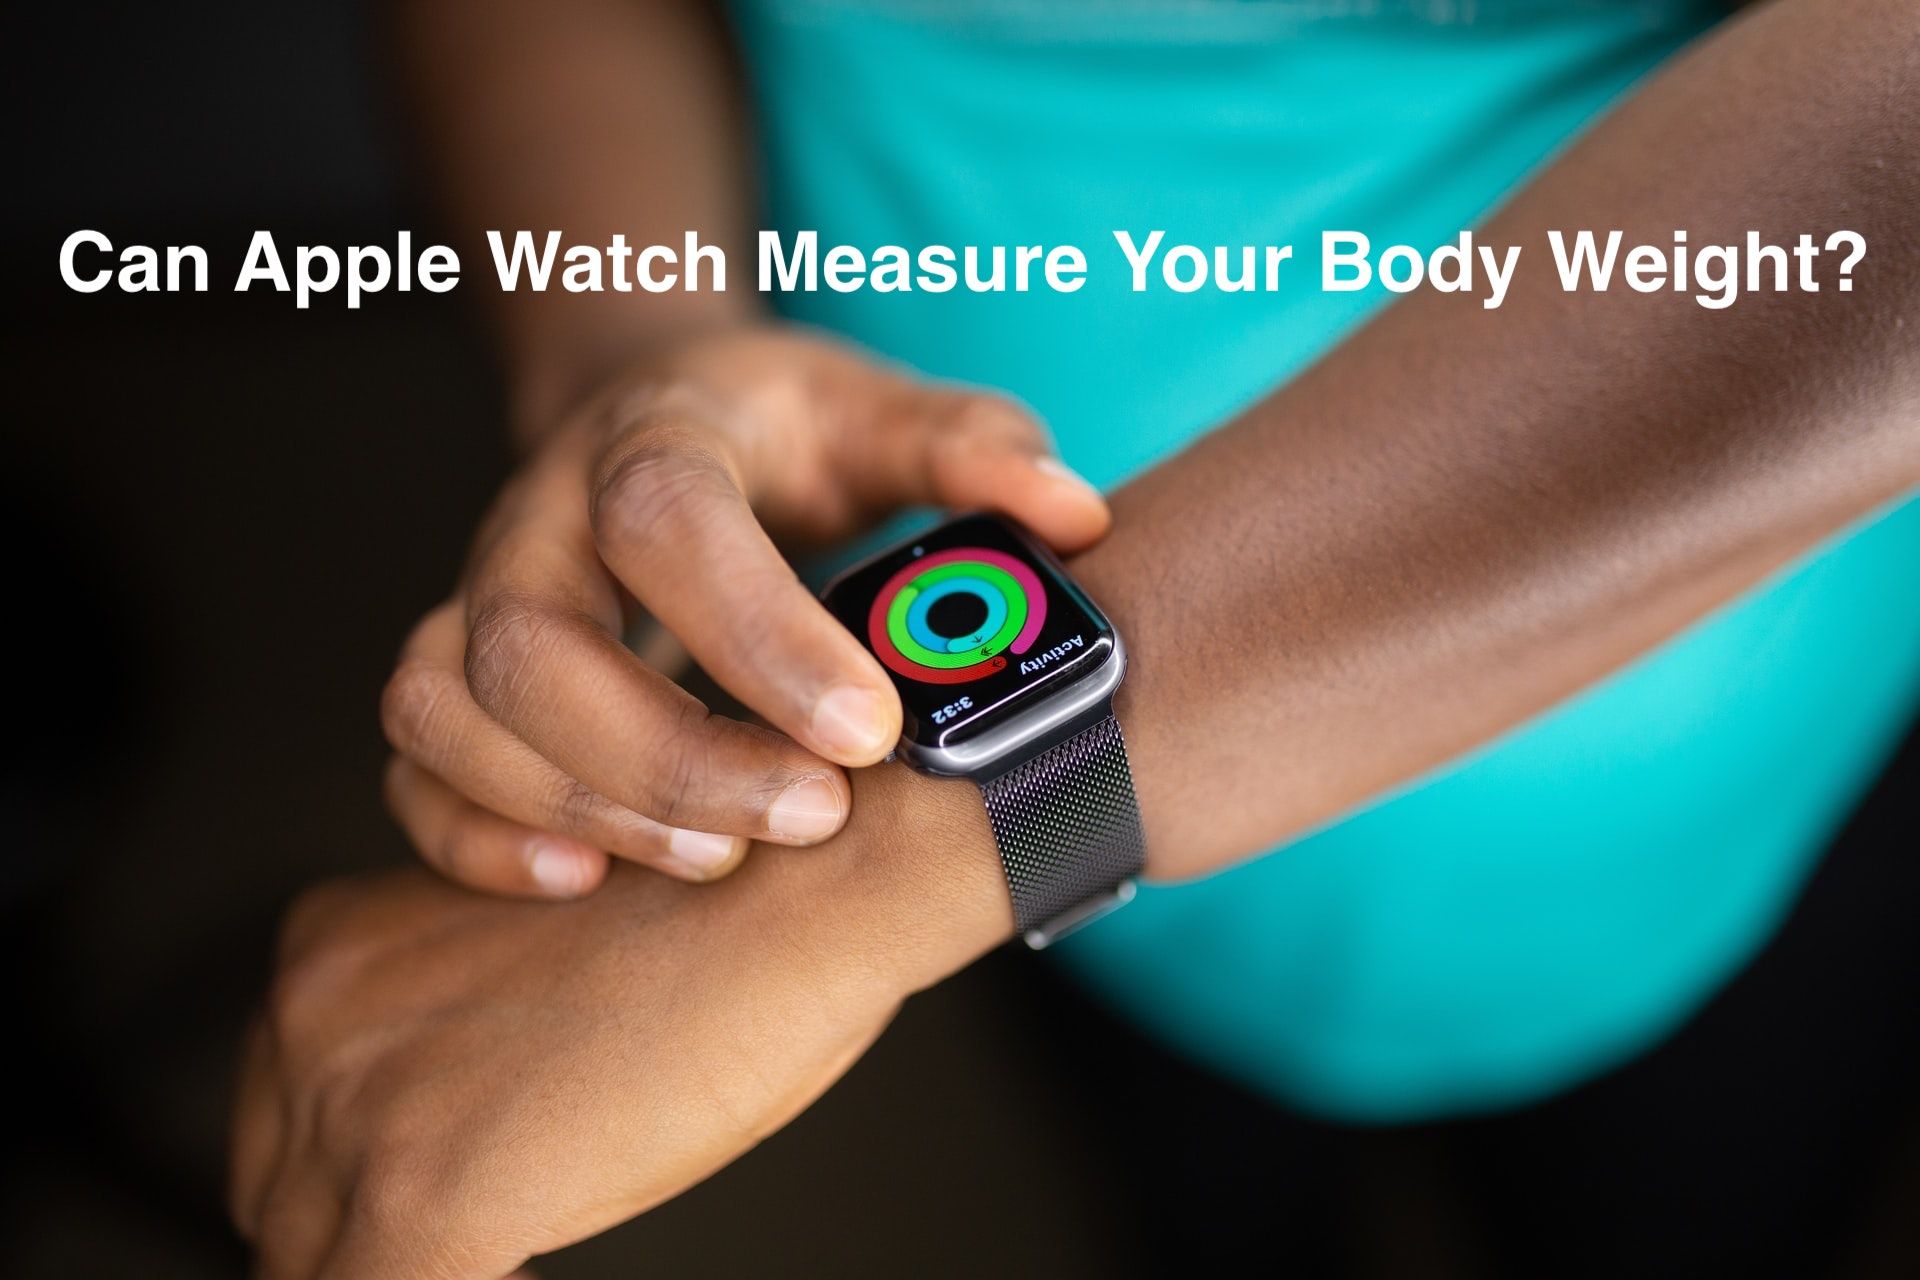 Can Apple Watch Measure Your Body Weight?